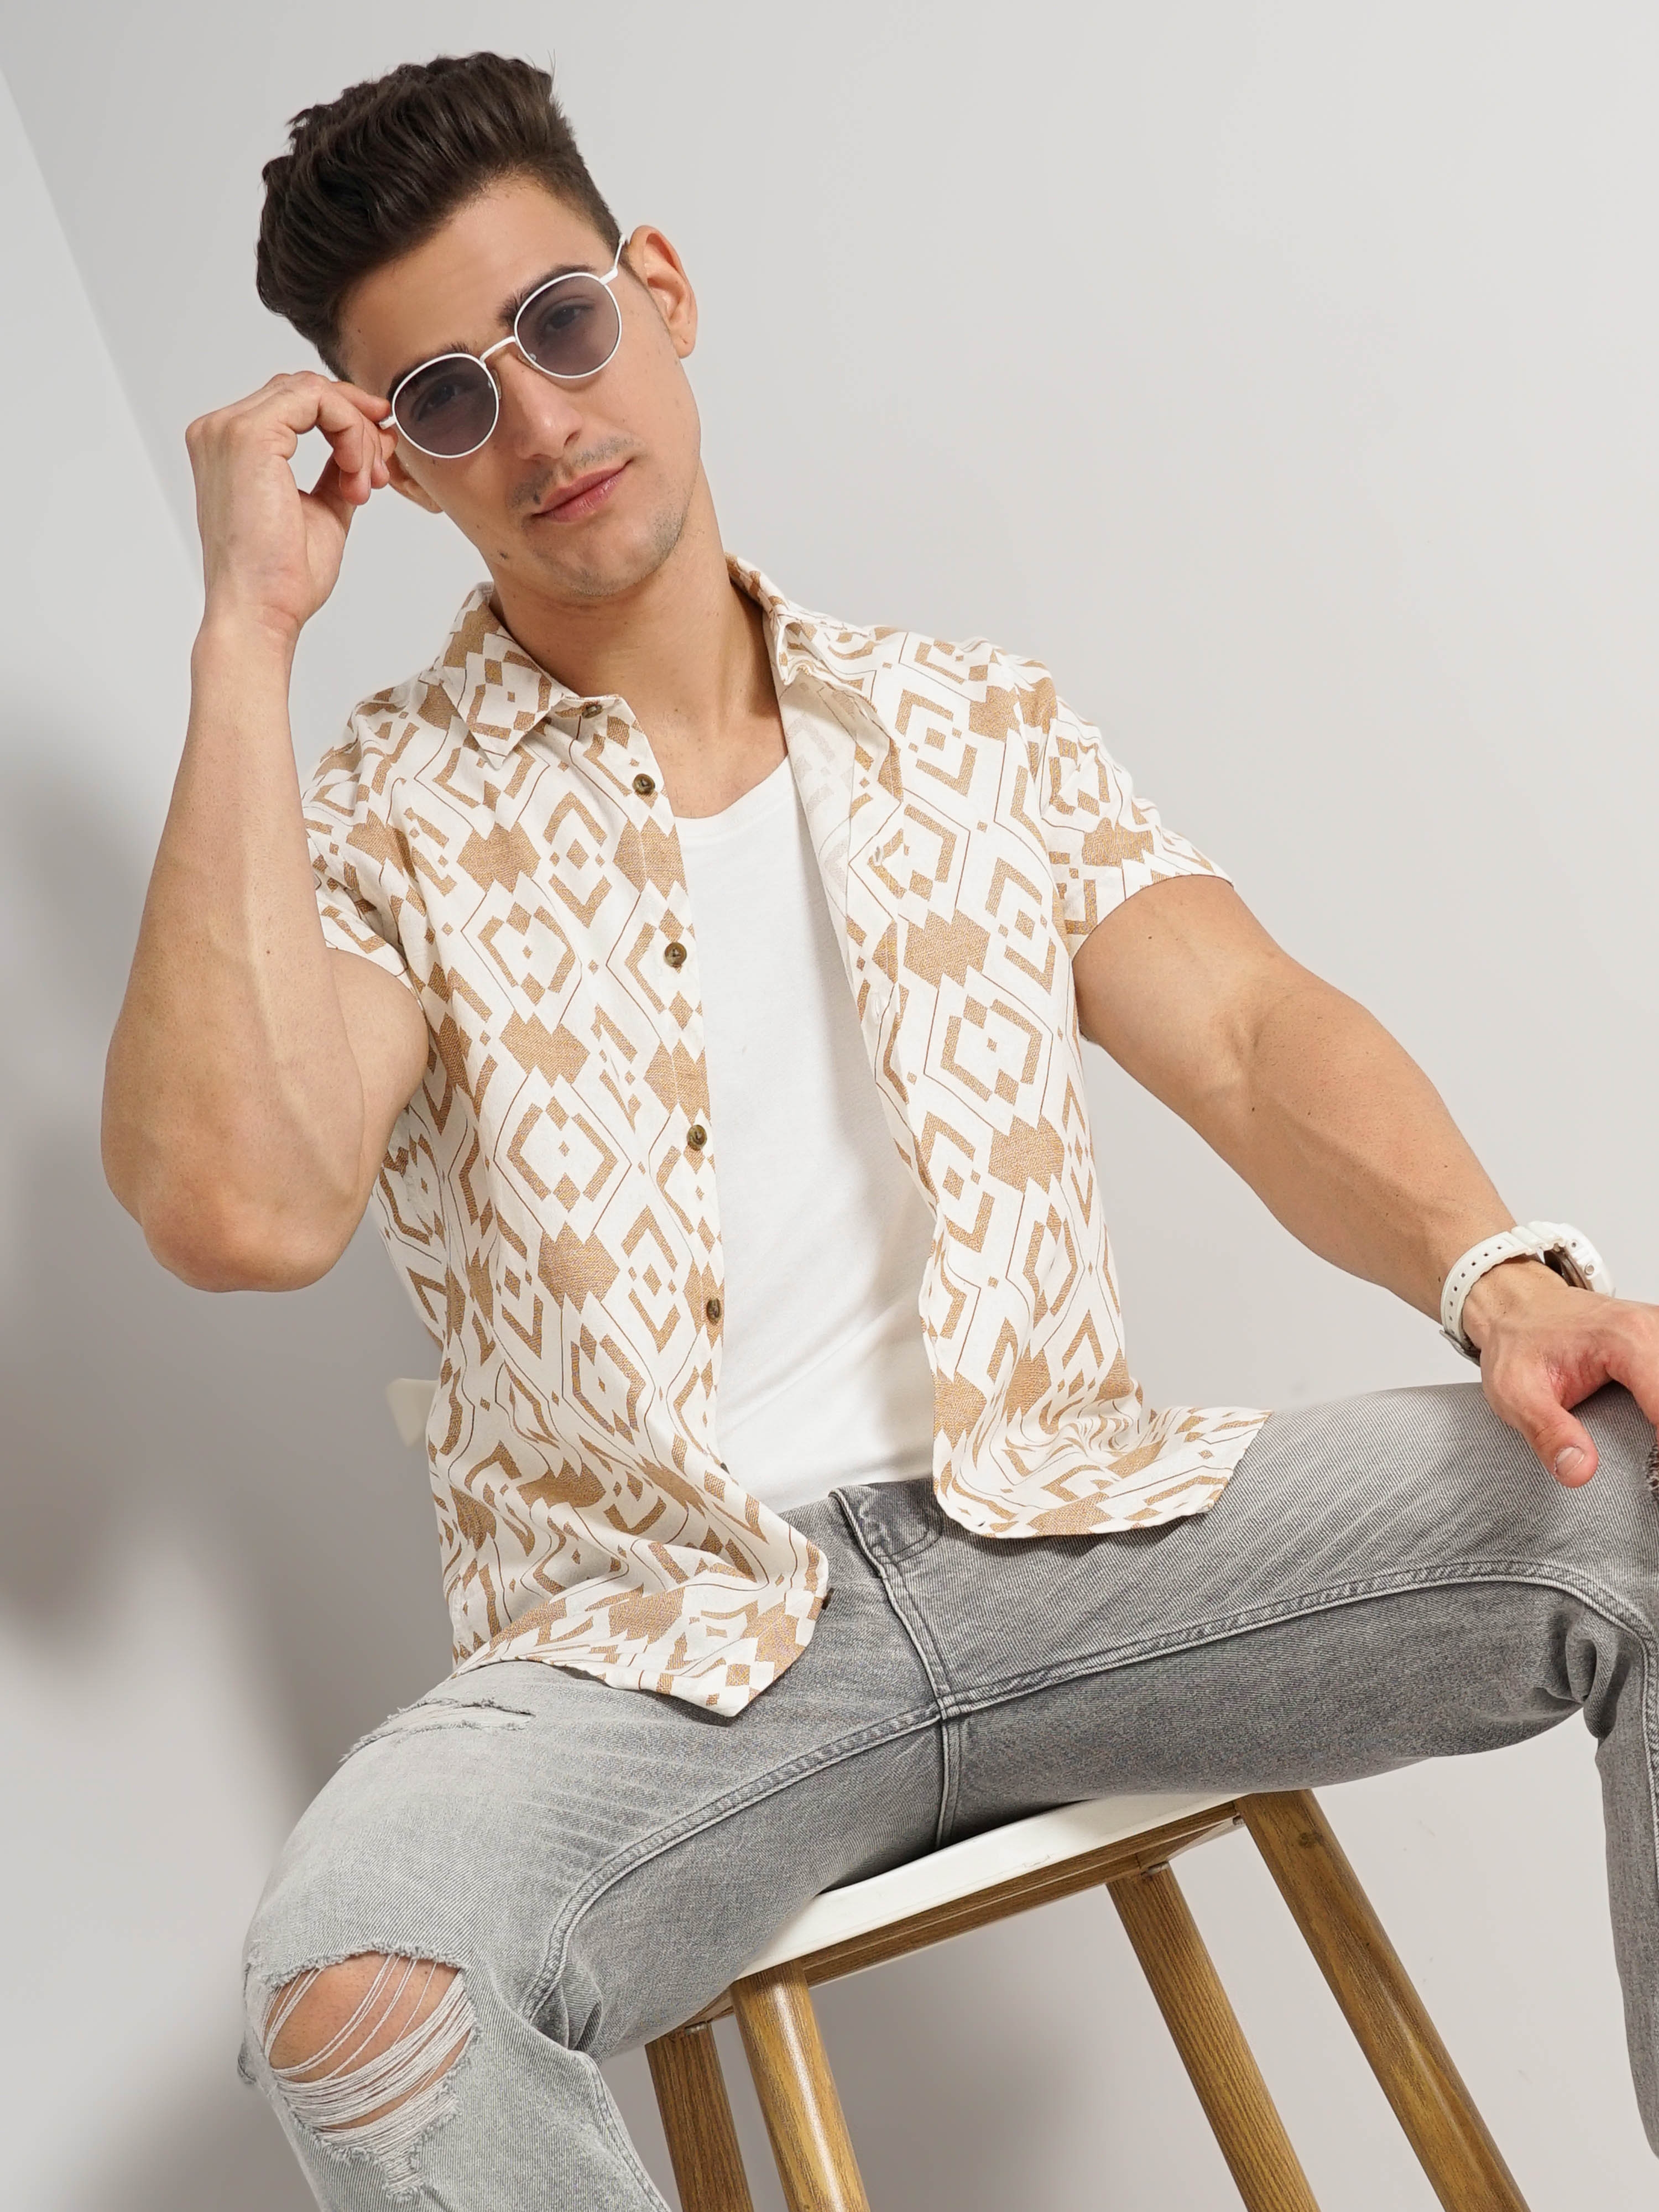 Men's Beige Printed Casual Shirts